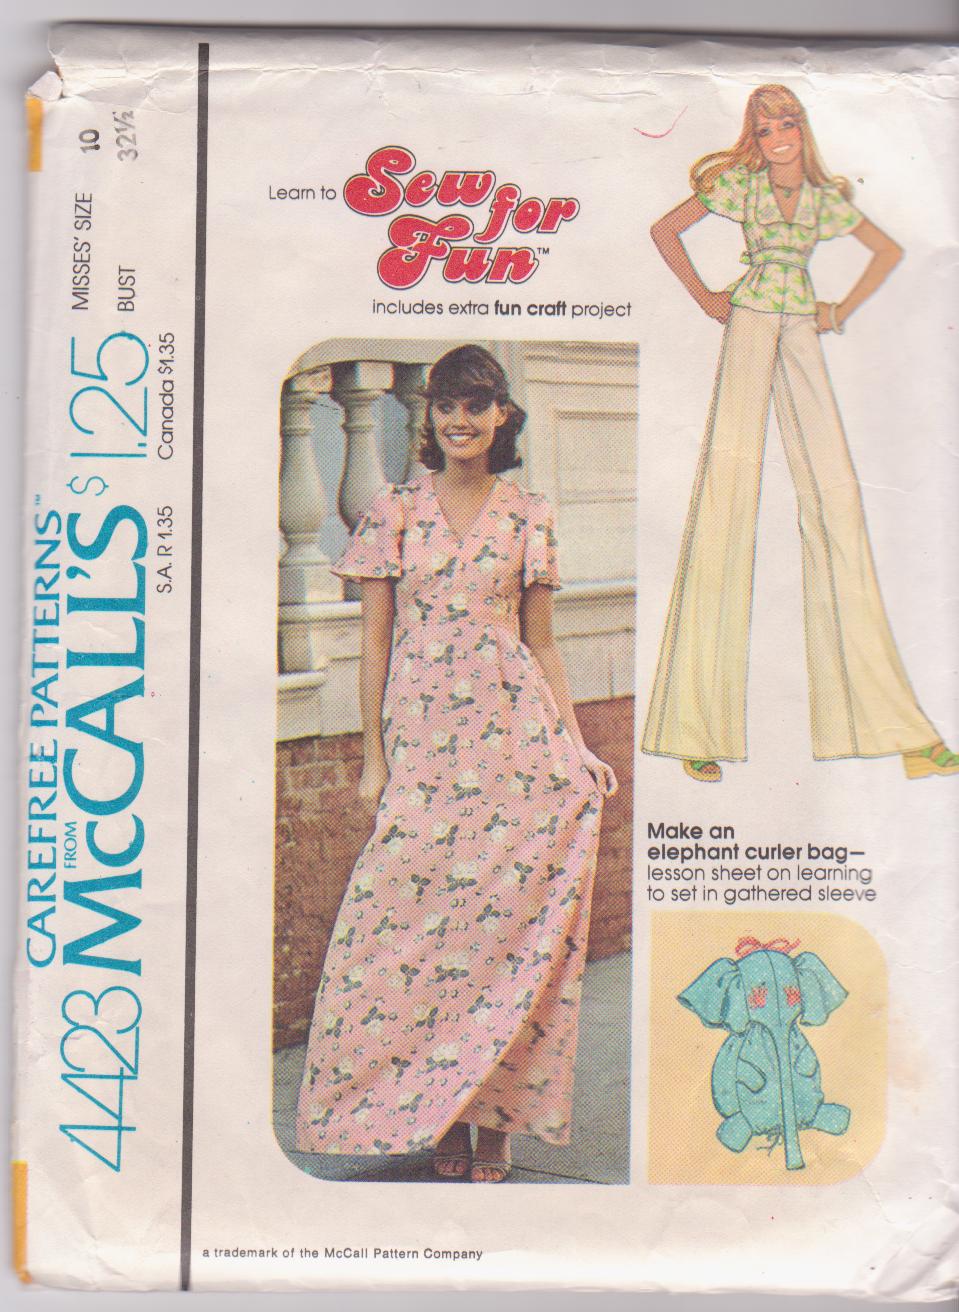 Vintage Sewing Patterns – Thanks! I Made Them. Sew Can You